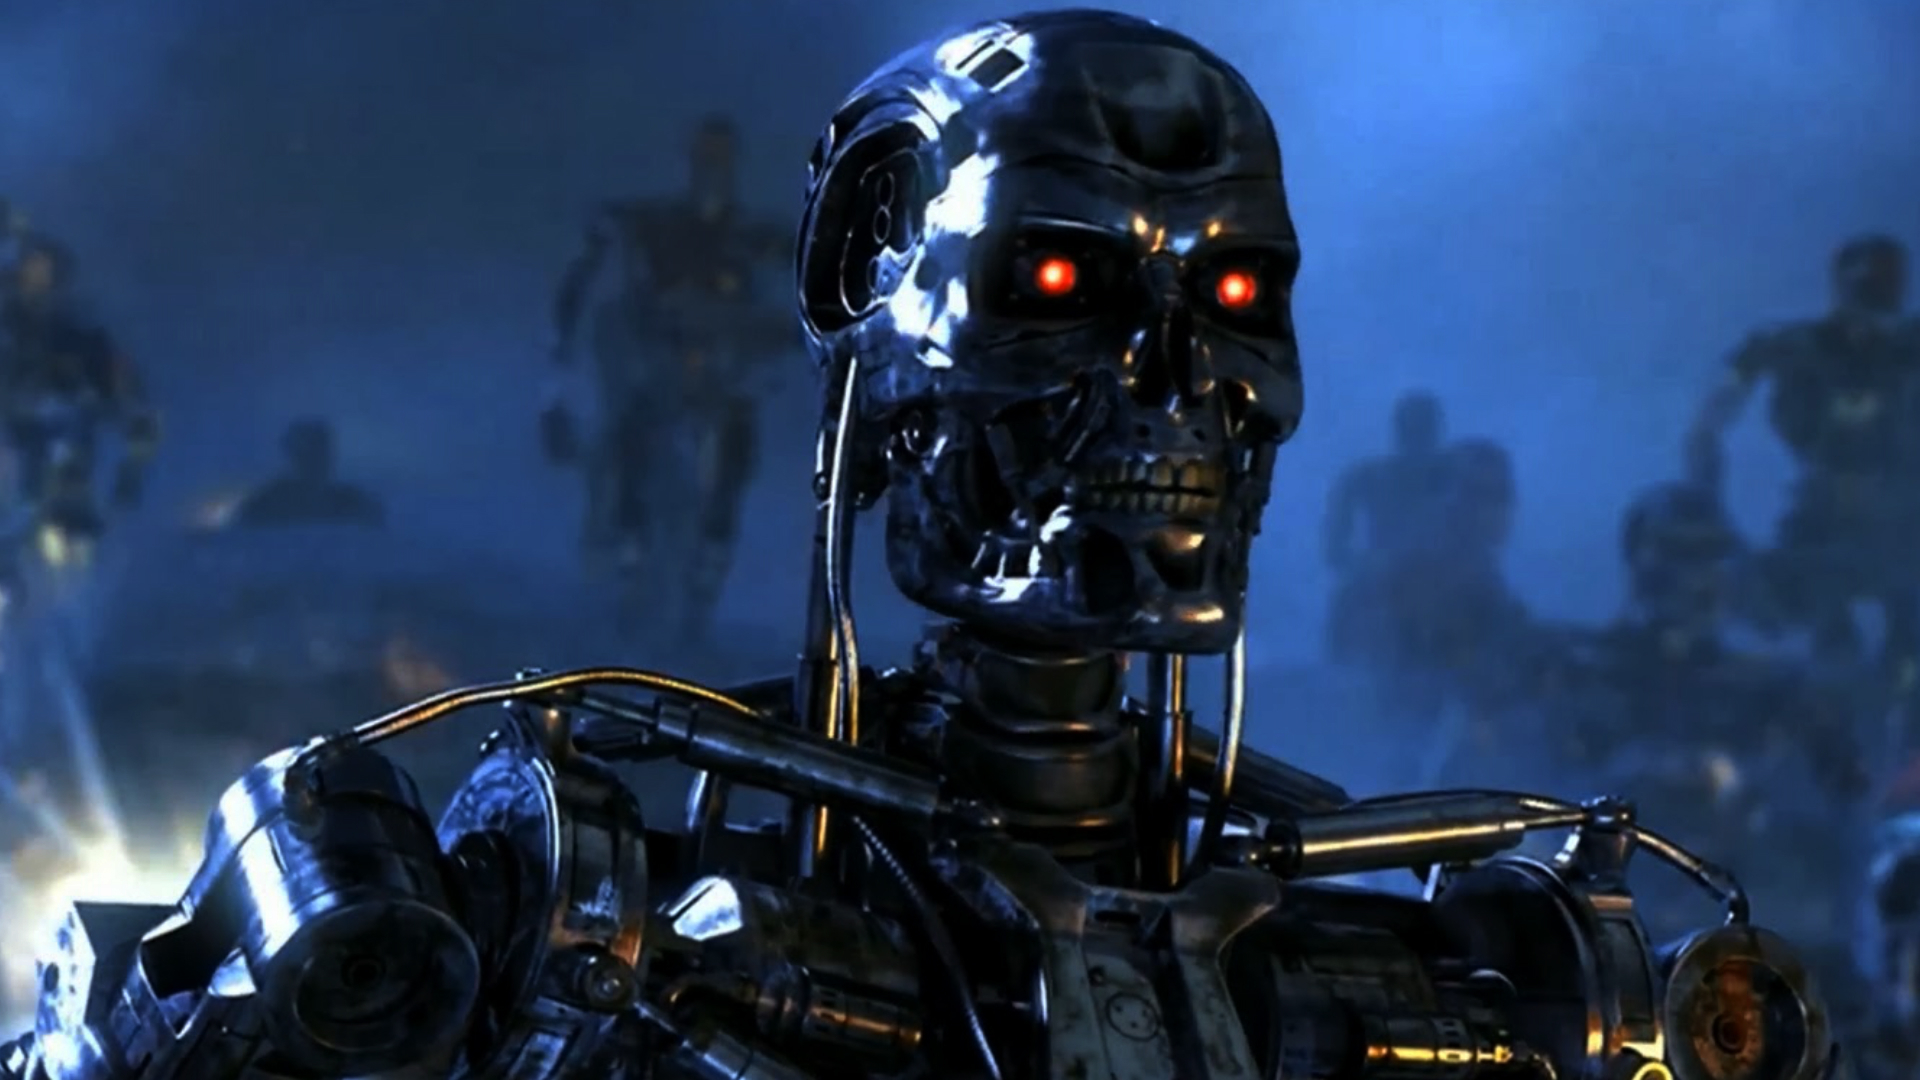 1920x1080 350+ Terminator HD Wallpapers and Backgrounds